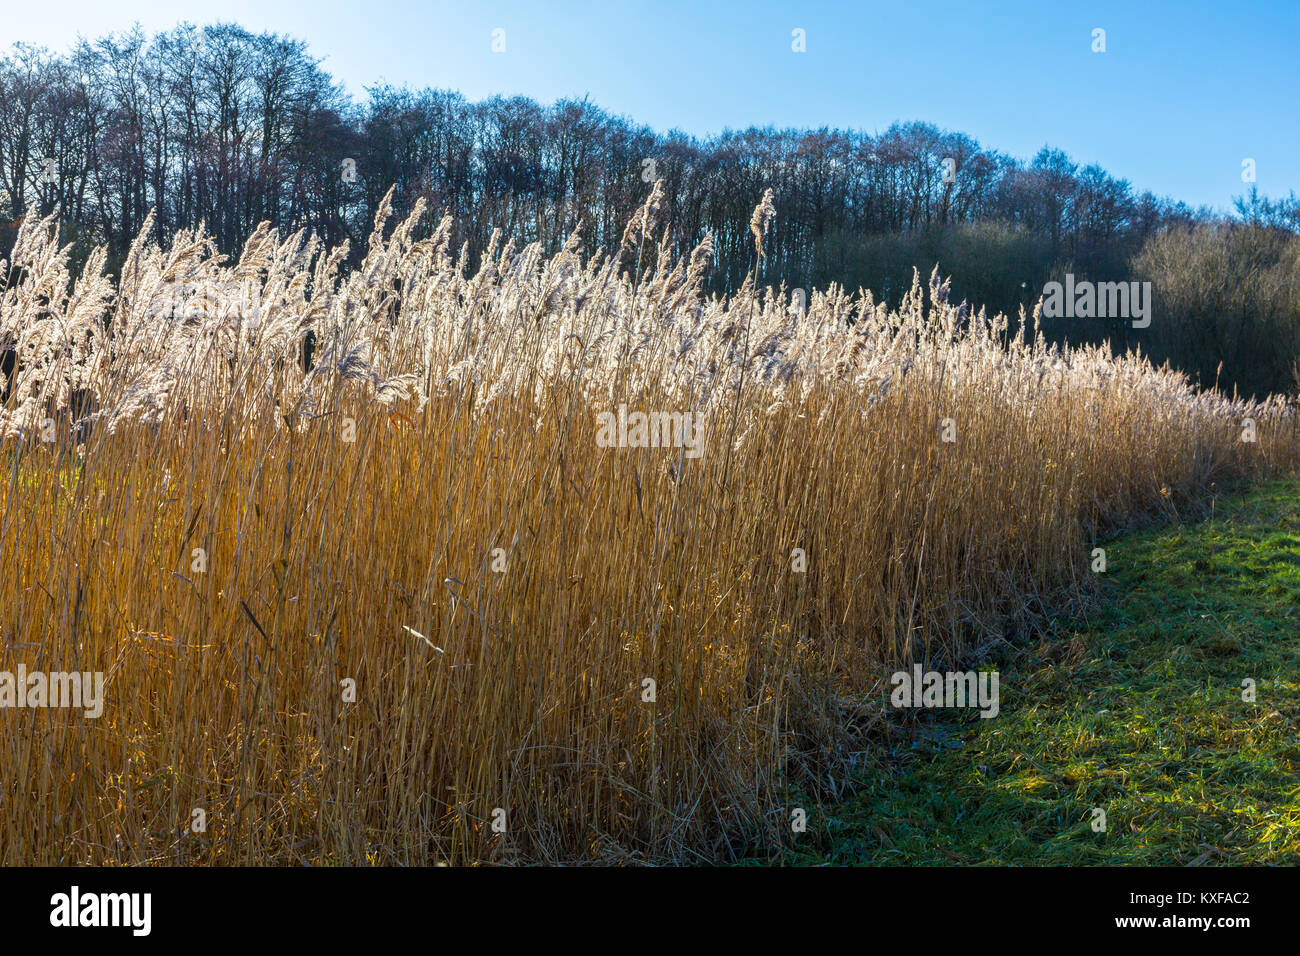 Reedbeds, phragmites australis, in winter at Redgrave and Lopham Fen, Suffolk, UK. Stock Photo